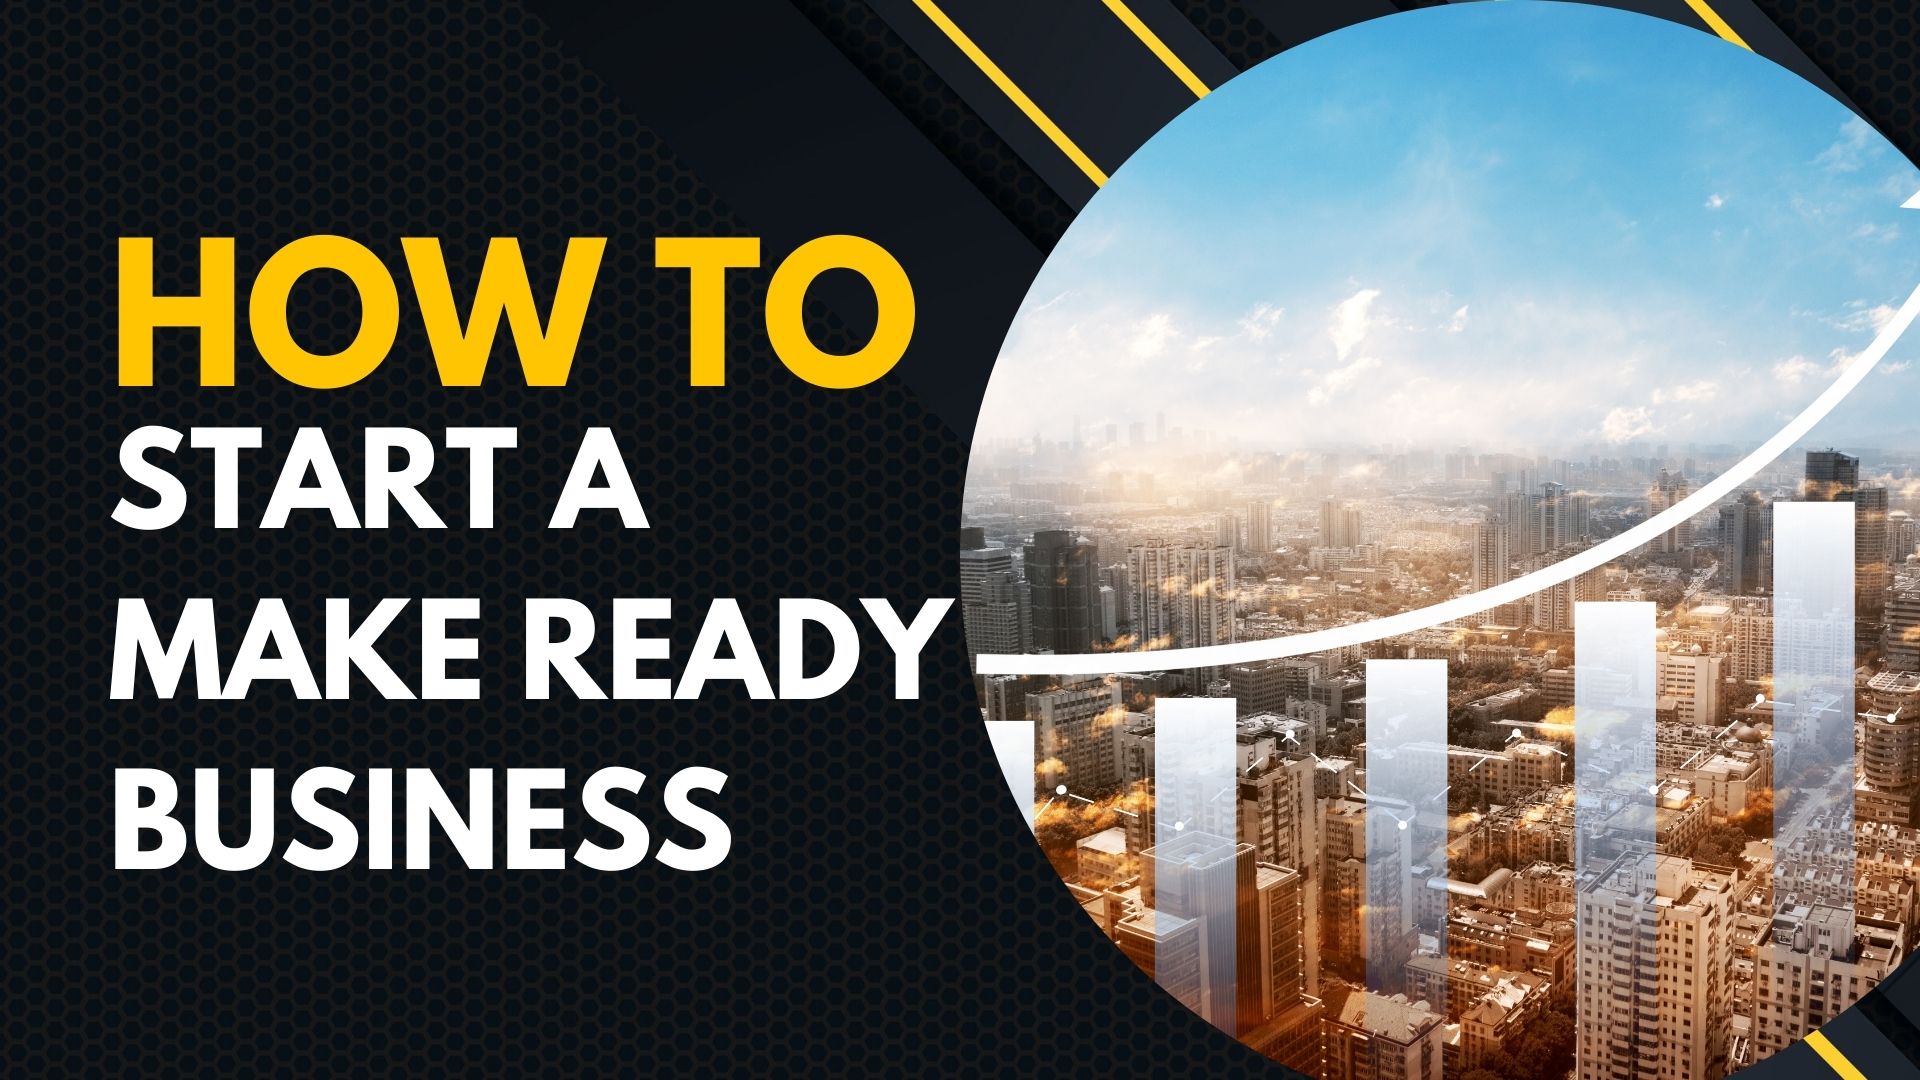 How to Start a Make Ready Business